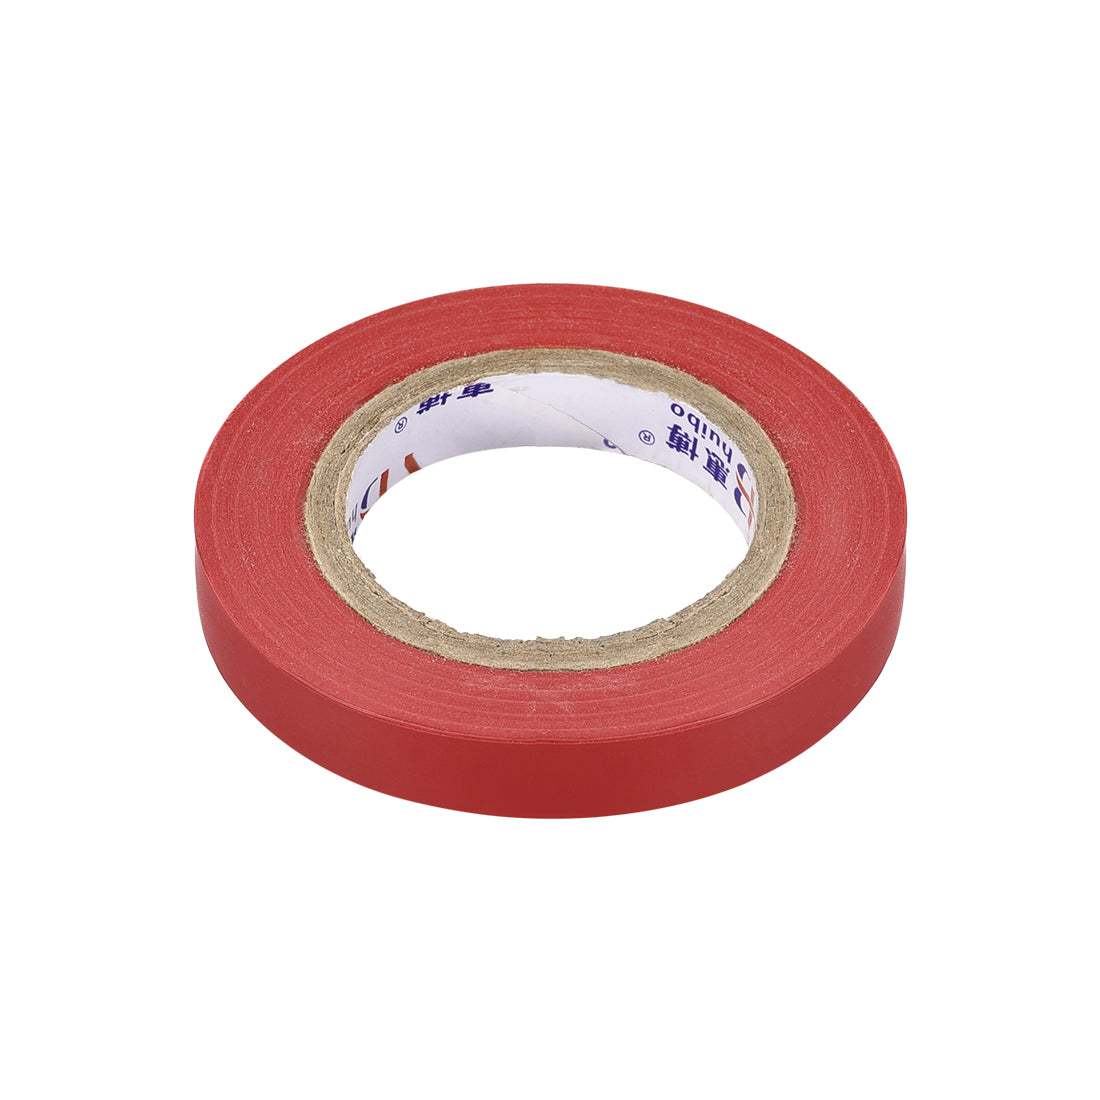 uxcell Uxcell Insulating Tape 10mm Width 14.5M Long 0.15mm Thick PVC Electrical Tape Rated for Max. 400V  80C Use Red 2pcs